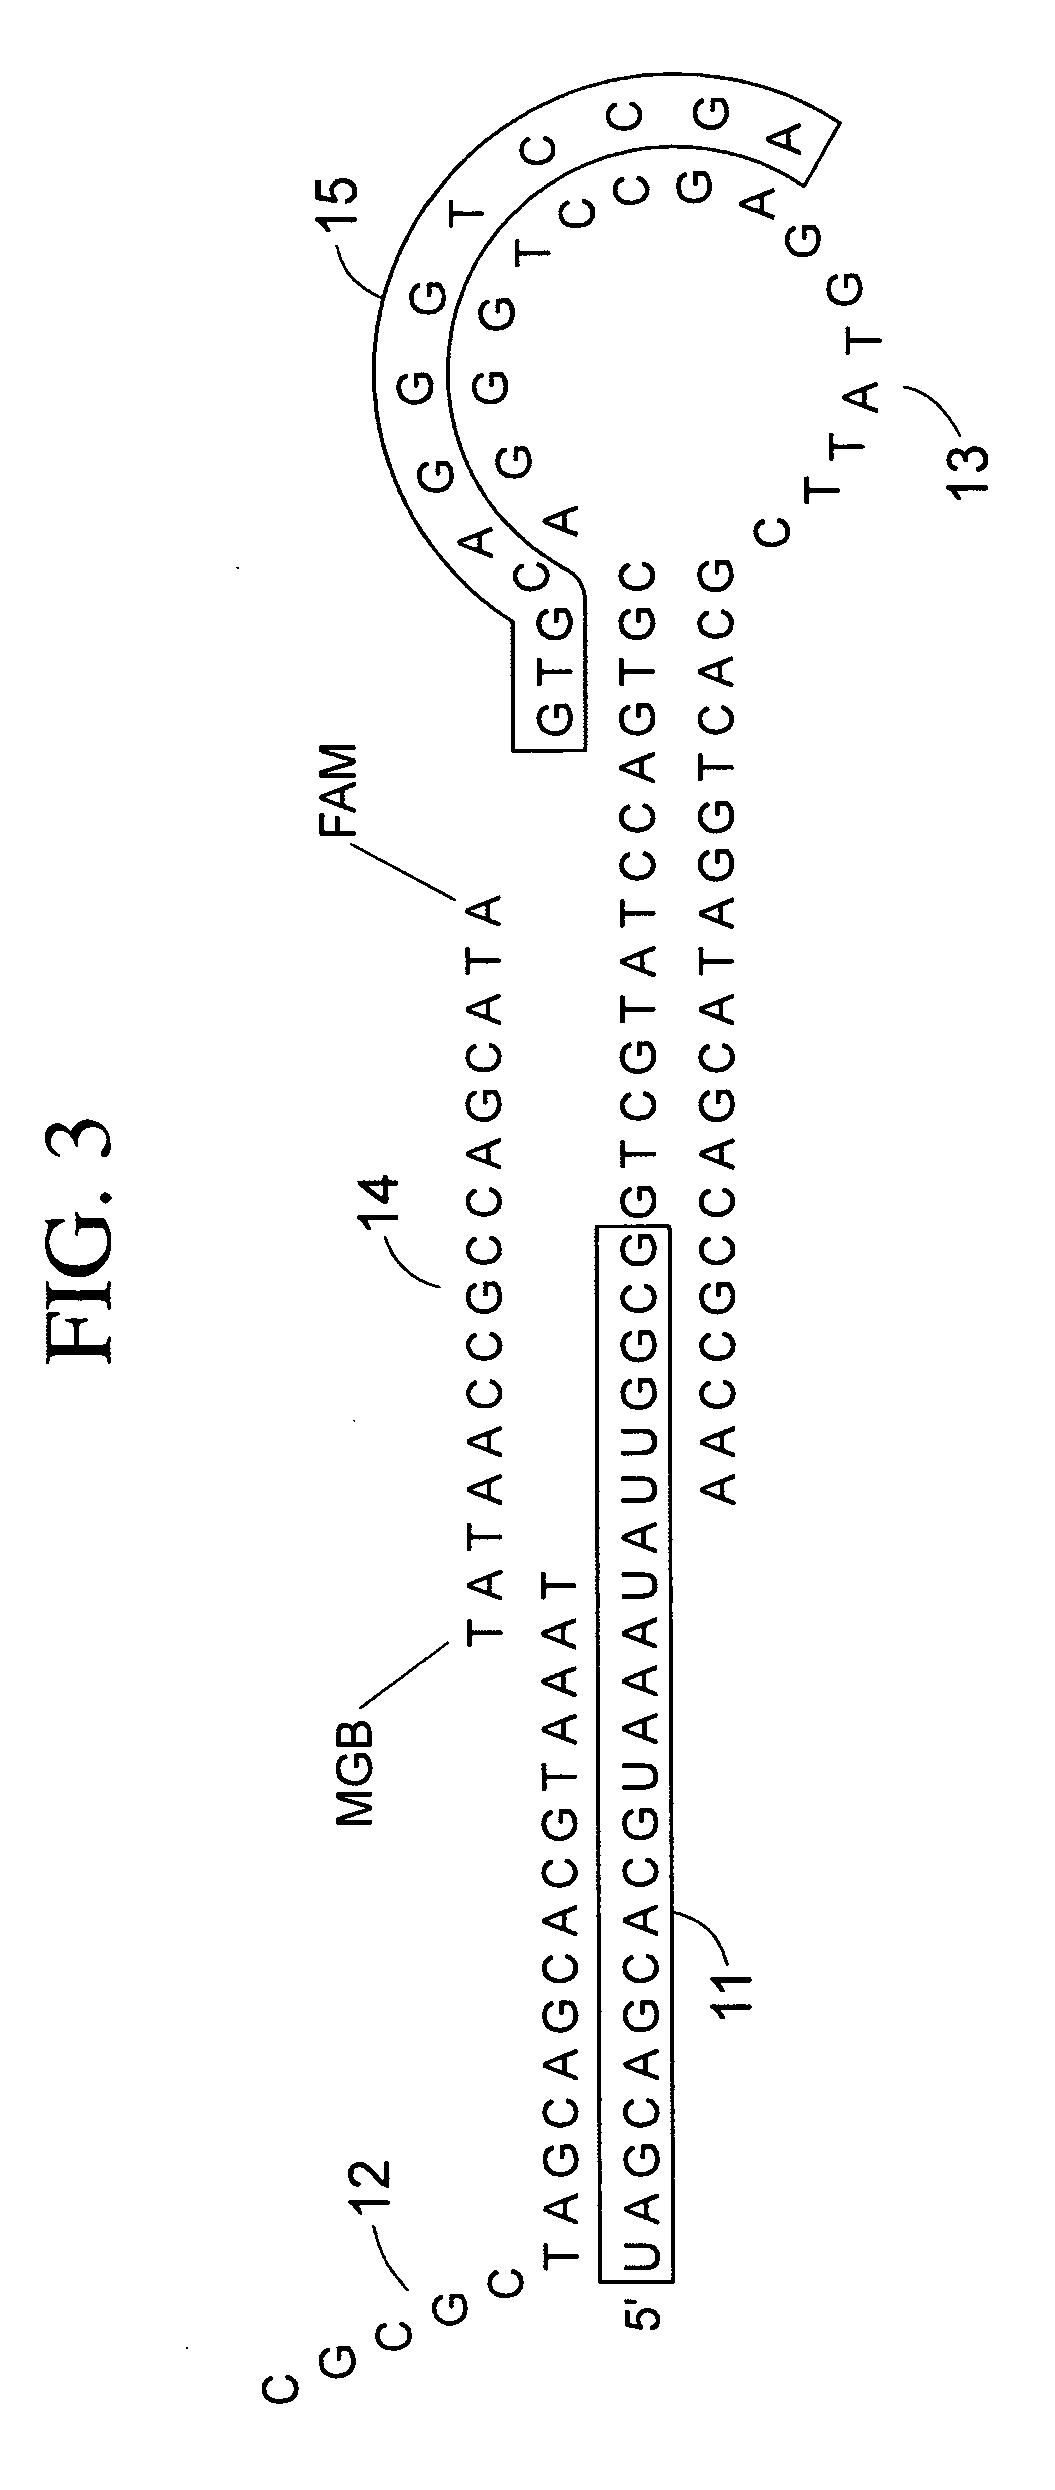 Method for identifying medically important cell populations using micro RNA as tissue specific biomarkers